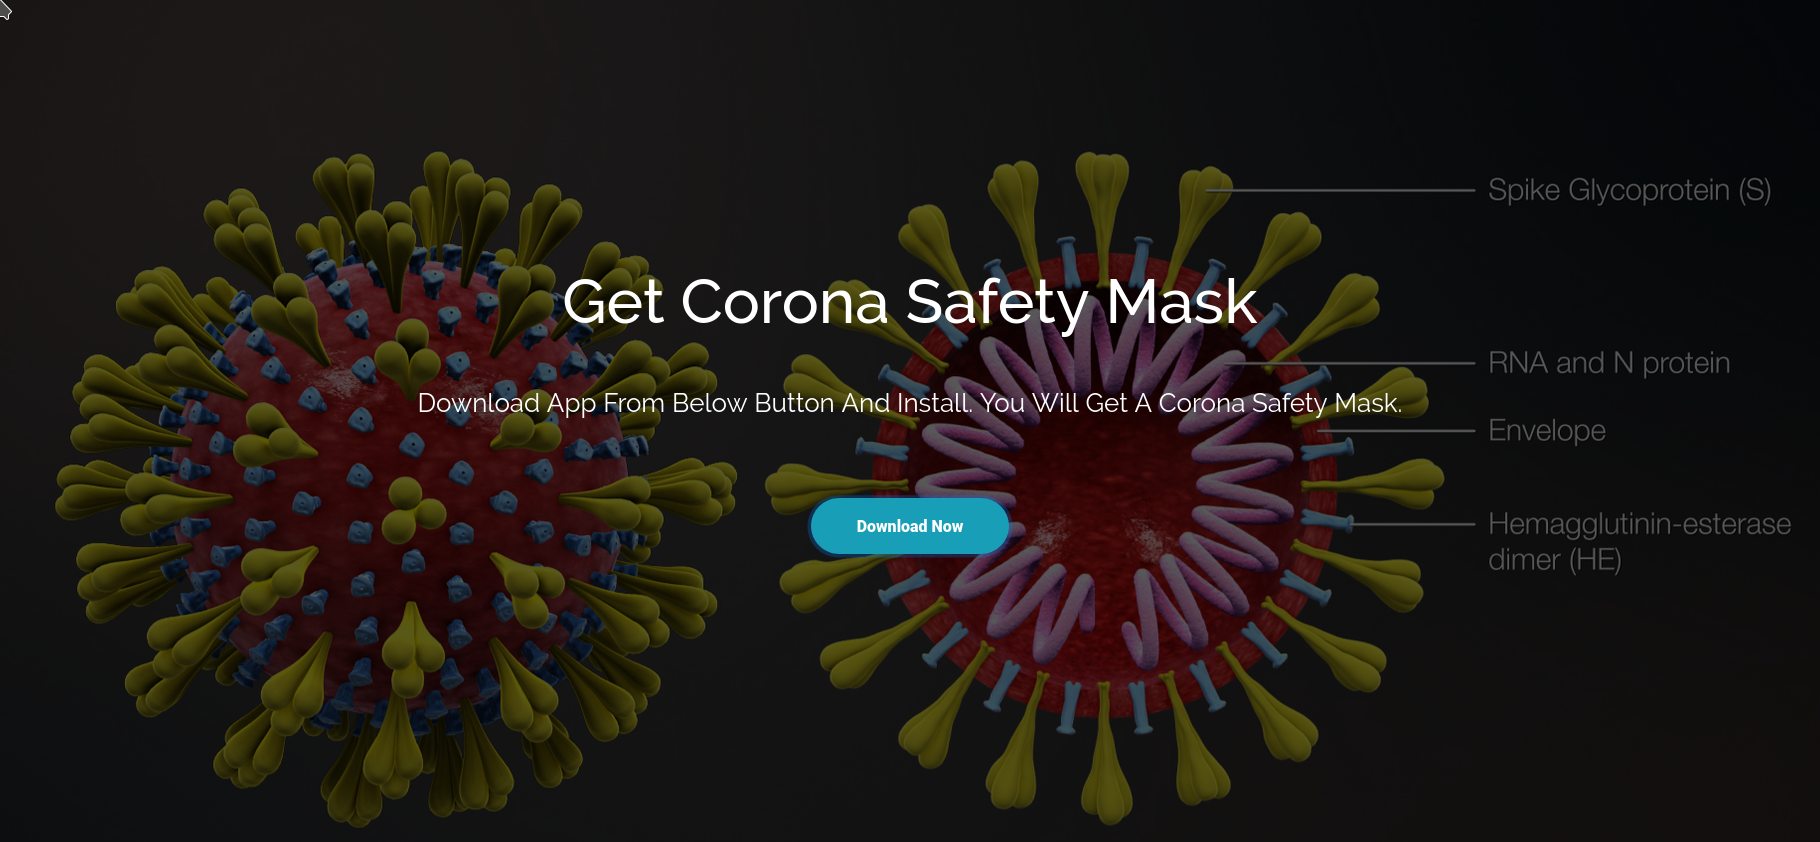 Jamba Superdeal: Helo Sir, you want to buy mask? - Corona Safety Mask SMS Scam